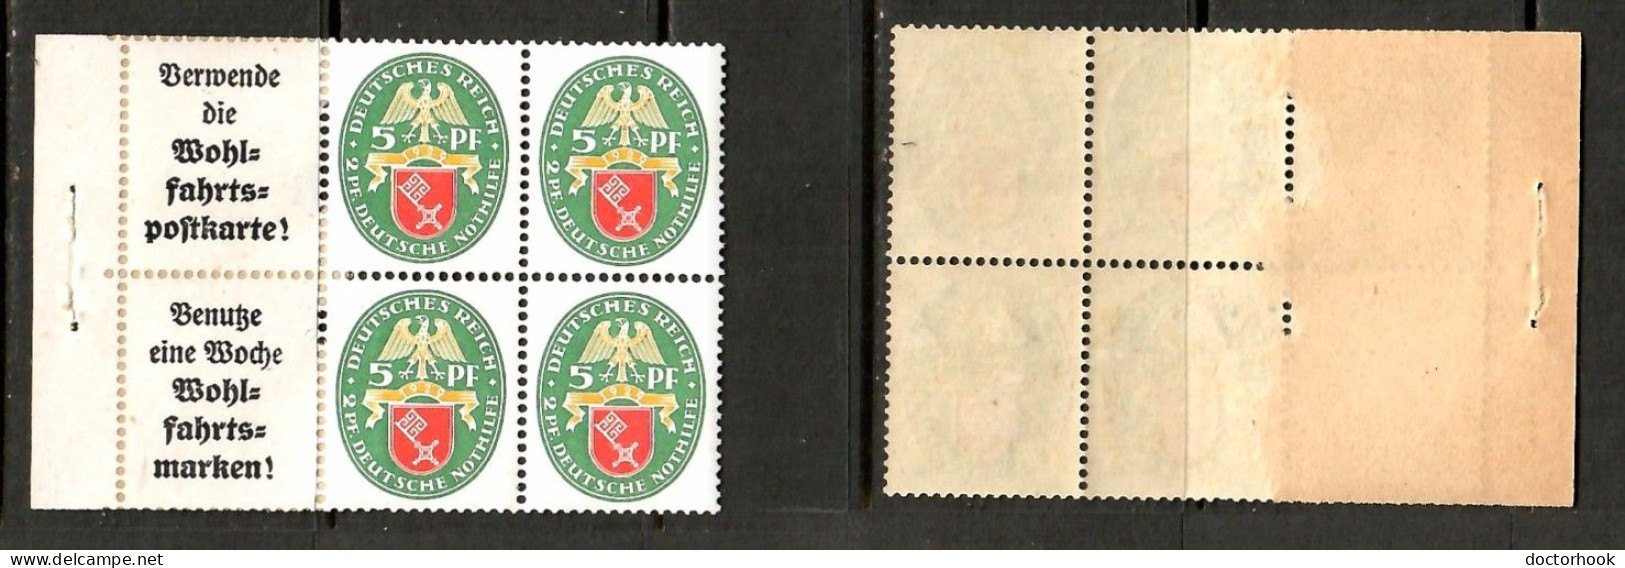 GERMANY   Scott # B 28* MINT OG BOOKLET PANE Of 4 + 2 LABELS (PAPER ADHESION)  (CONDITION AS PER SCAN) (LG-1764) - Carnets & Se-tenant